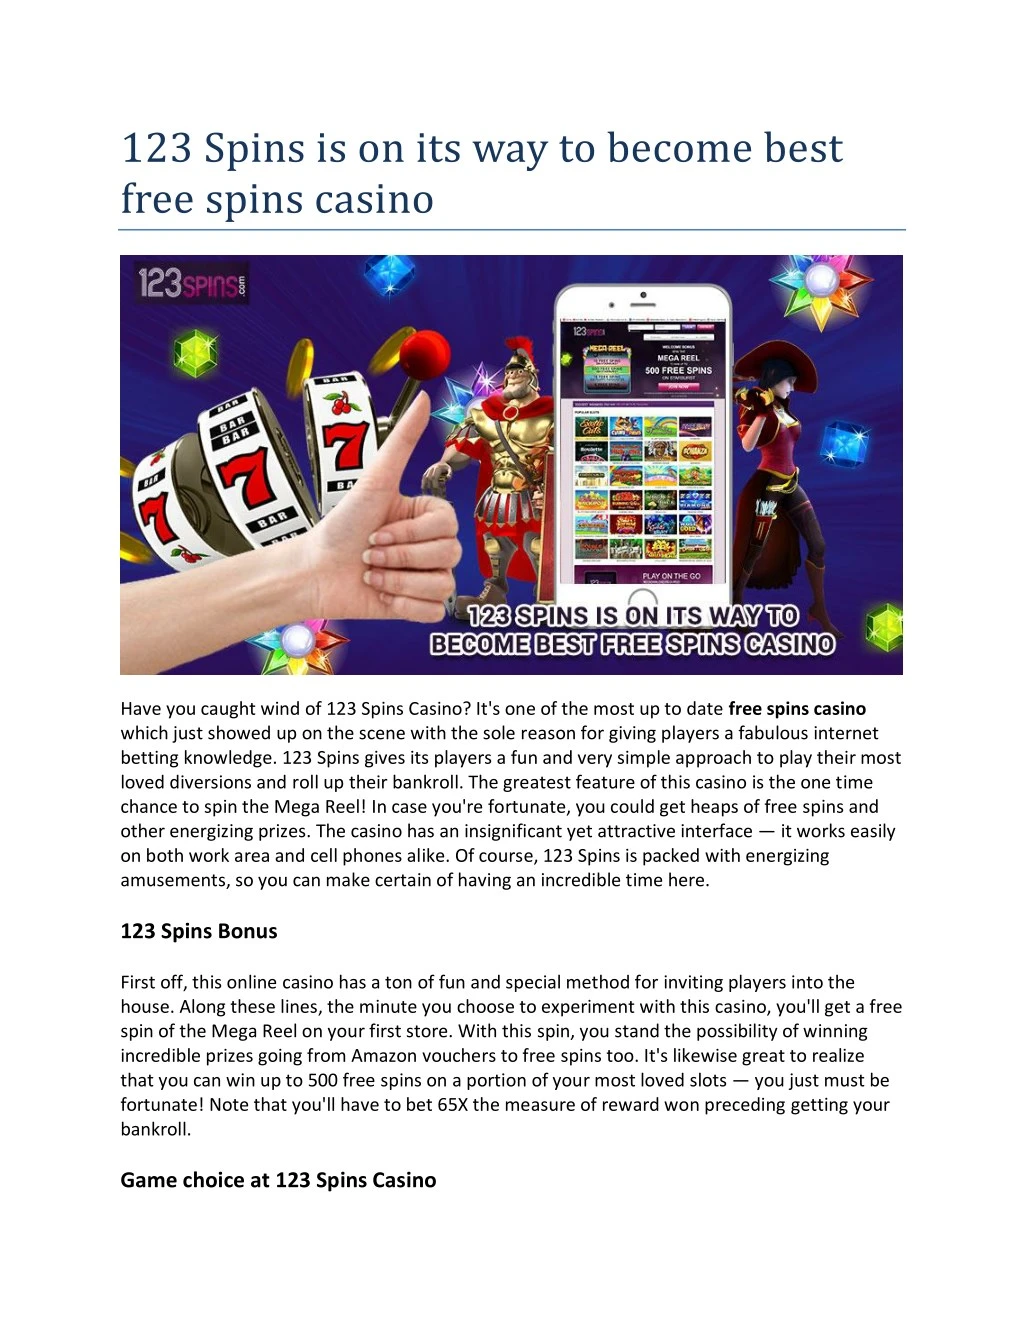 123 spins is on its way to become best free spins